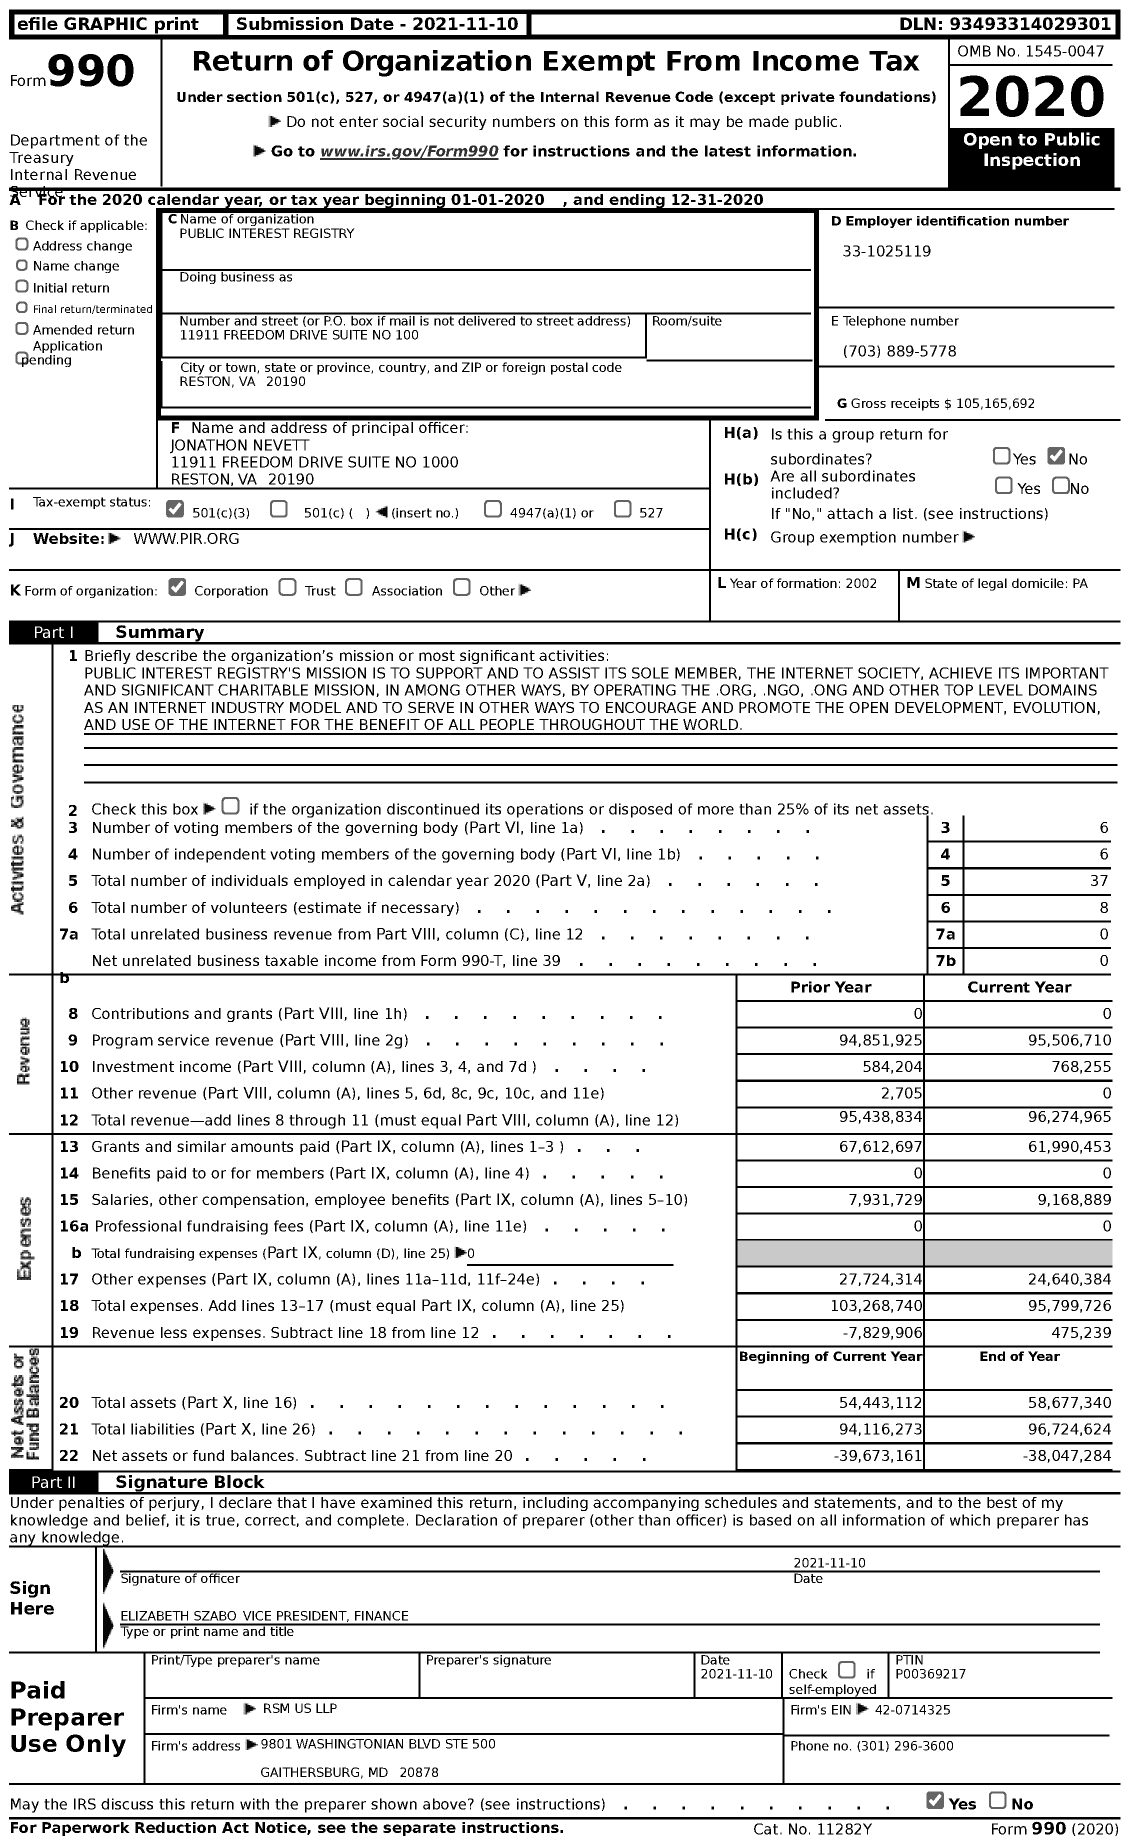 Image of first page of 2020 Form 990 for Public Interest Registry (PIR)